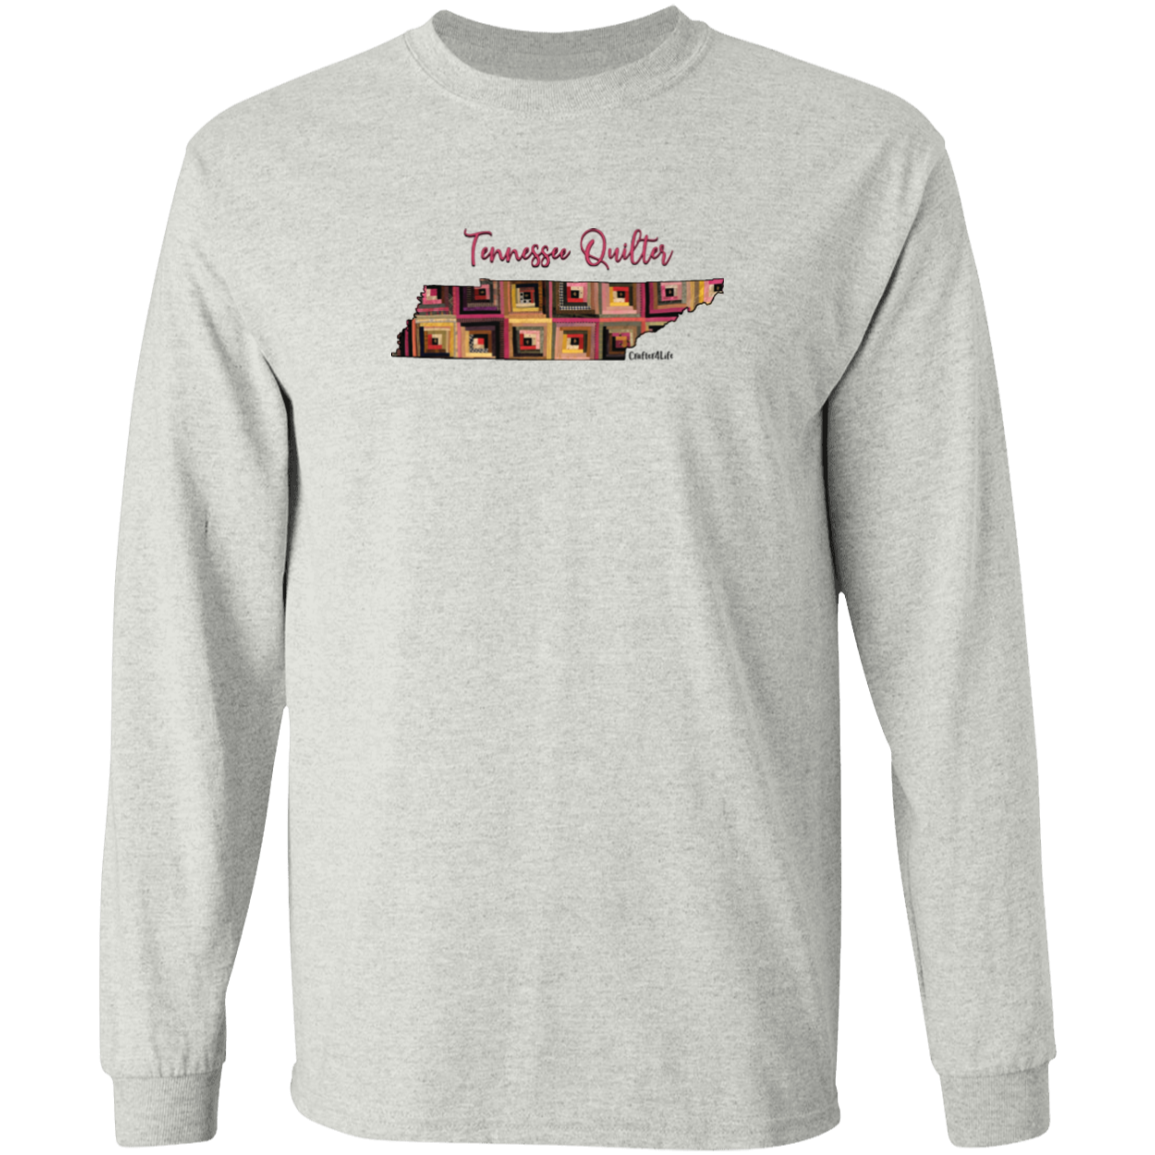 Tennessee Quilter Long Sleeve T-Shirt, Gift for Quilting Friends and Family